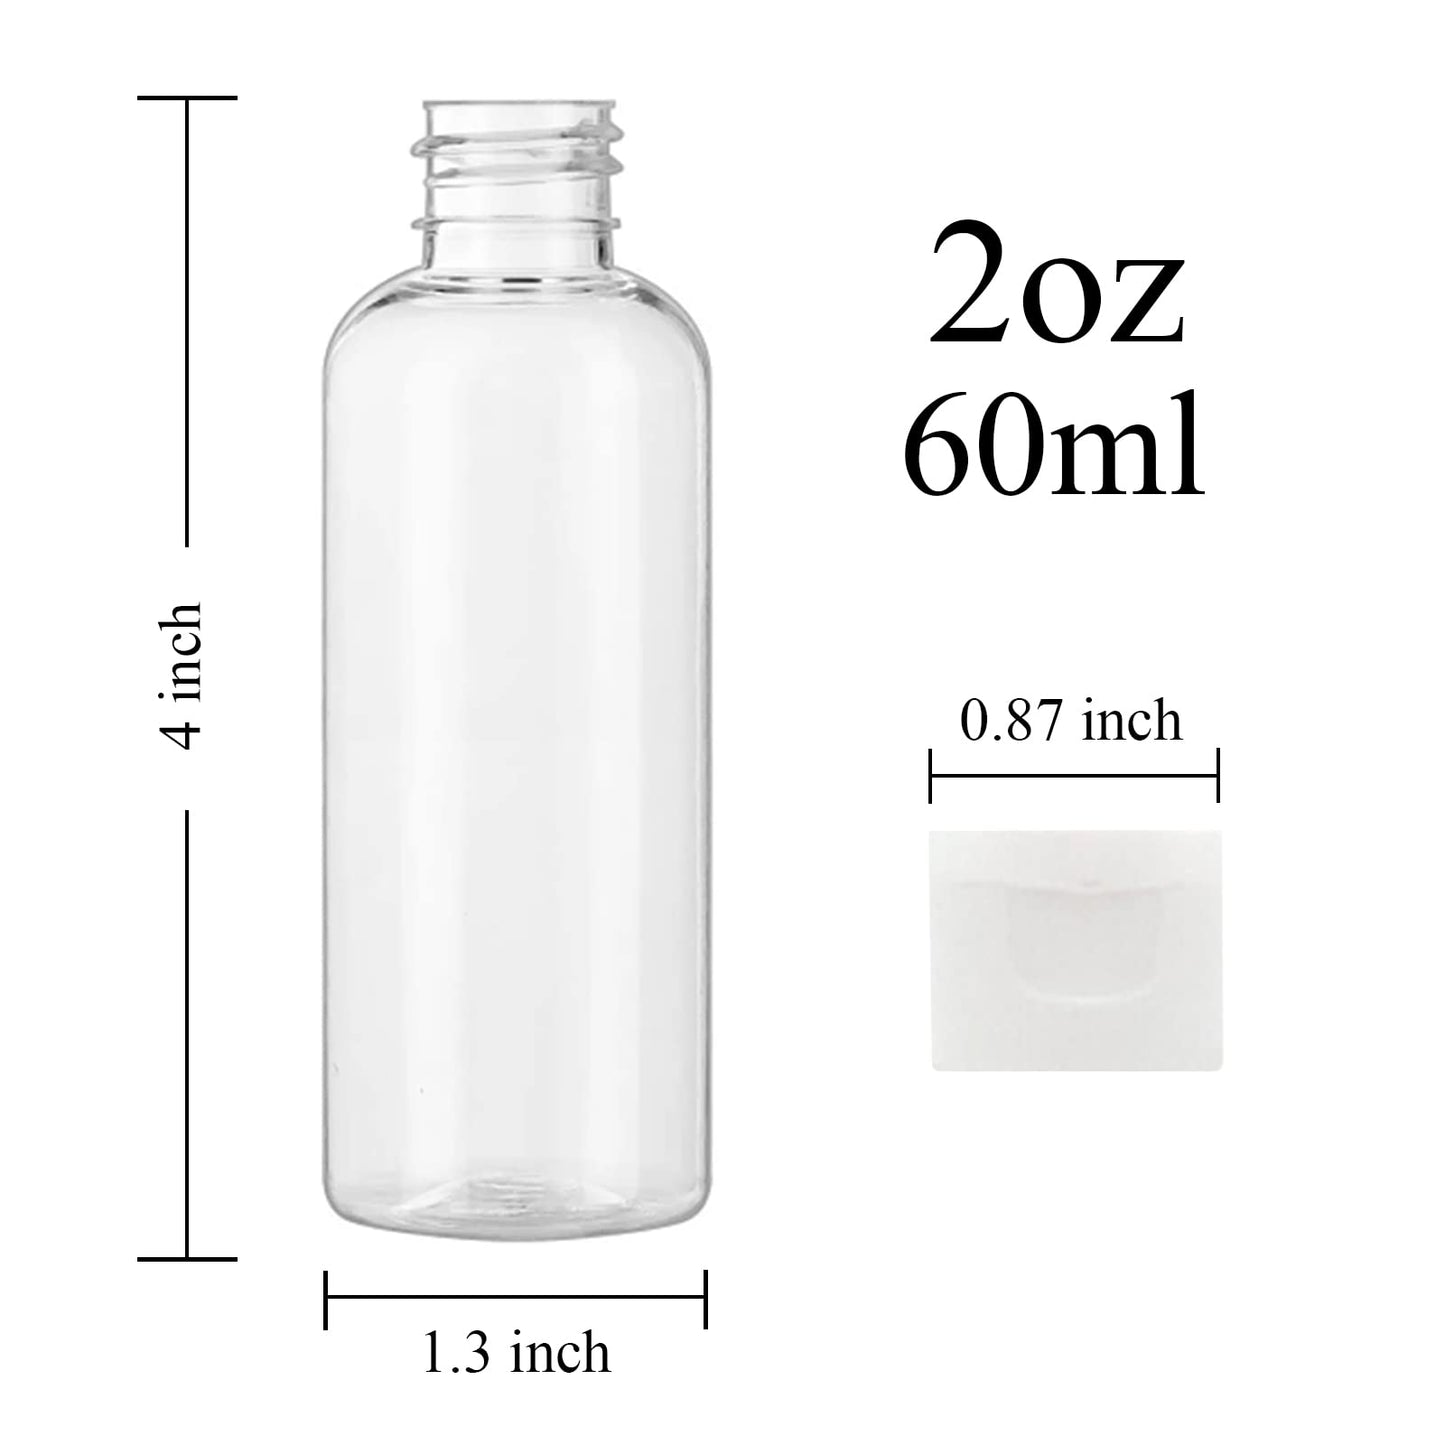 2 Oz Plastic Containers with Lids, Clear Travel Bottles for Toiletries Shampoo Refillable Travel Containers - Set of 25